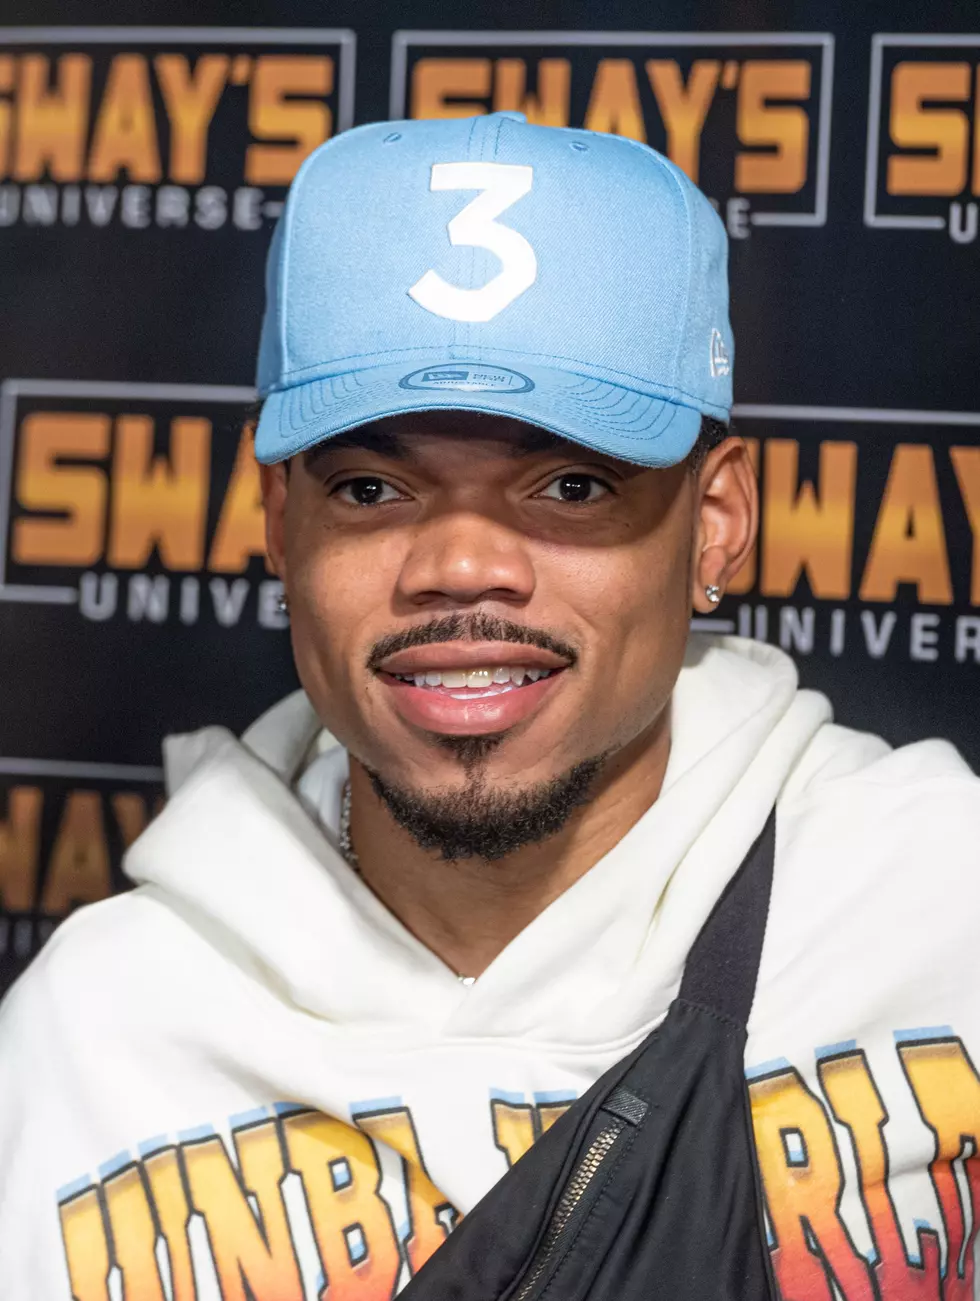 Chance the Rapper visits 'Sway in the Morning' with Sway Calloway on Eminem's Shade 45 at the SiriusXM Studios on August 02, 2022 in New York City.